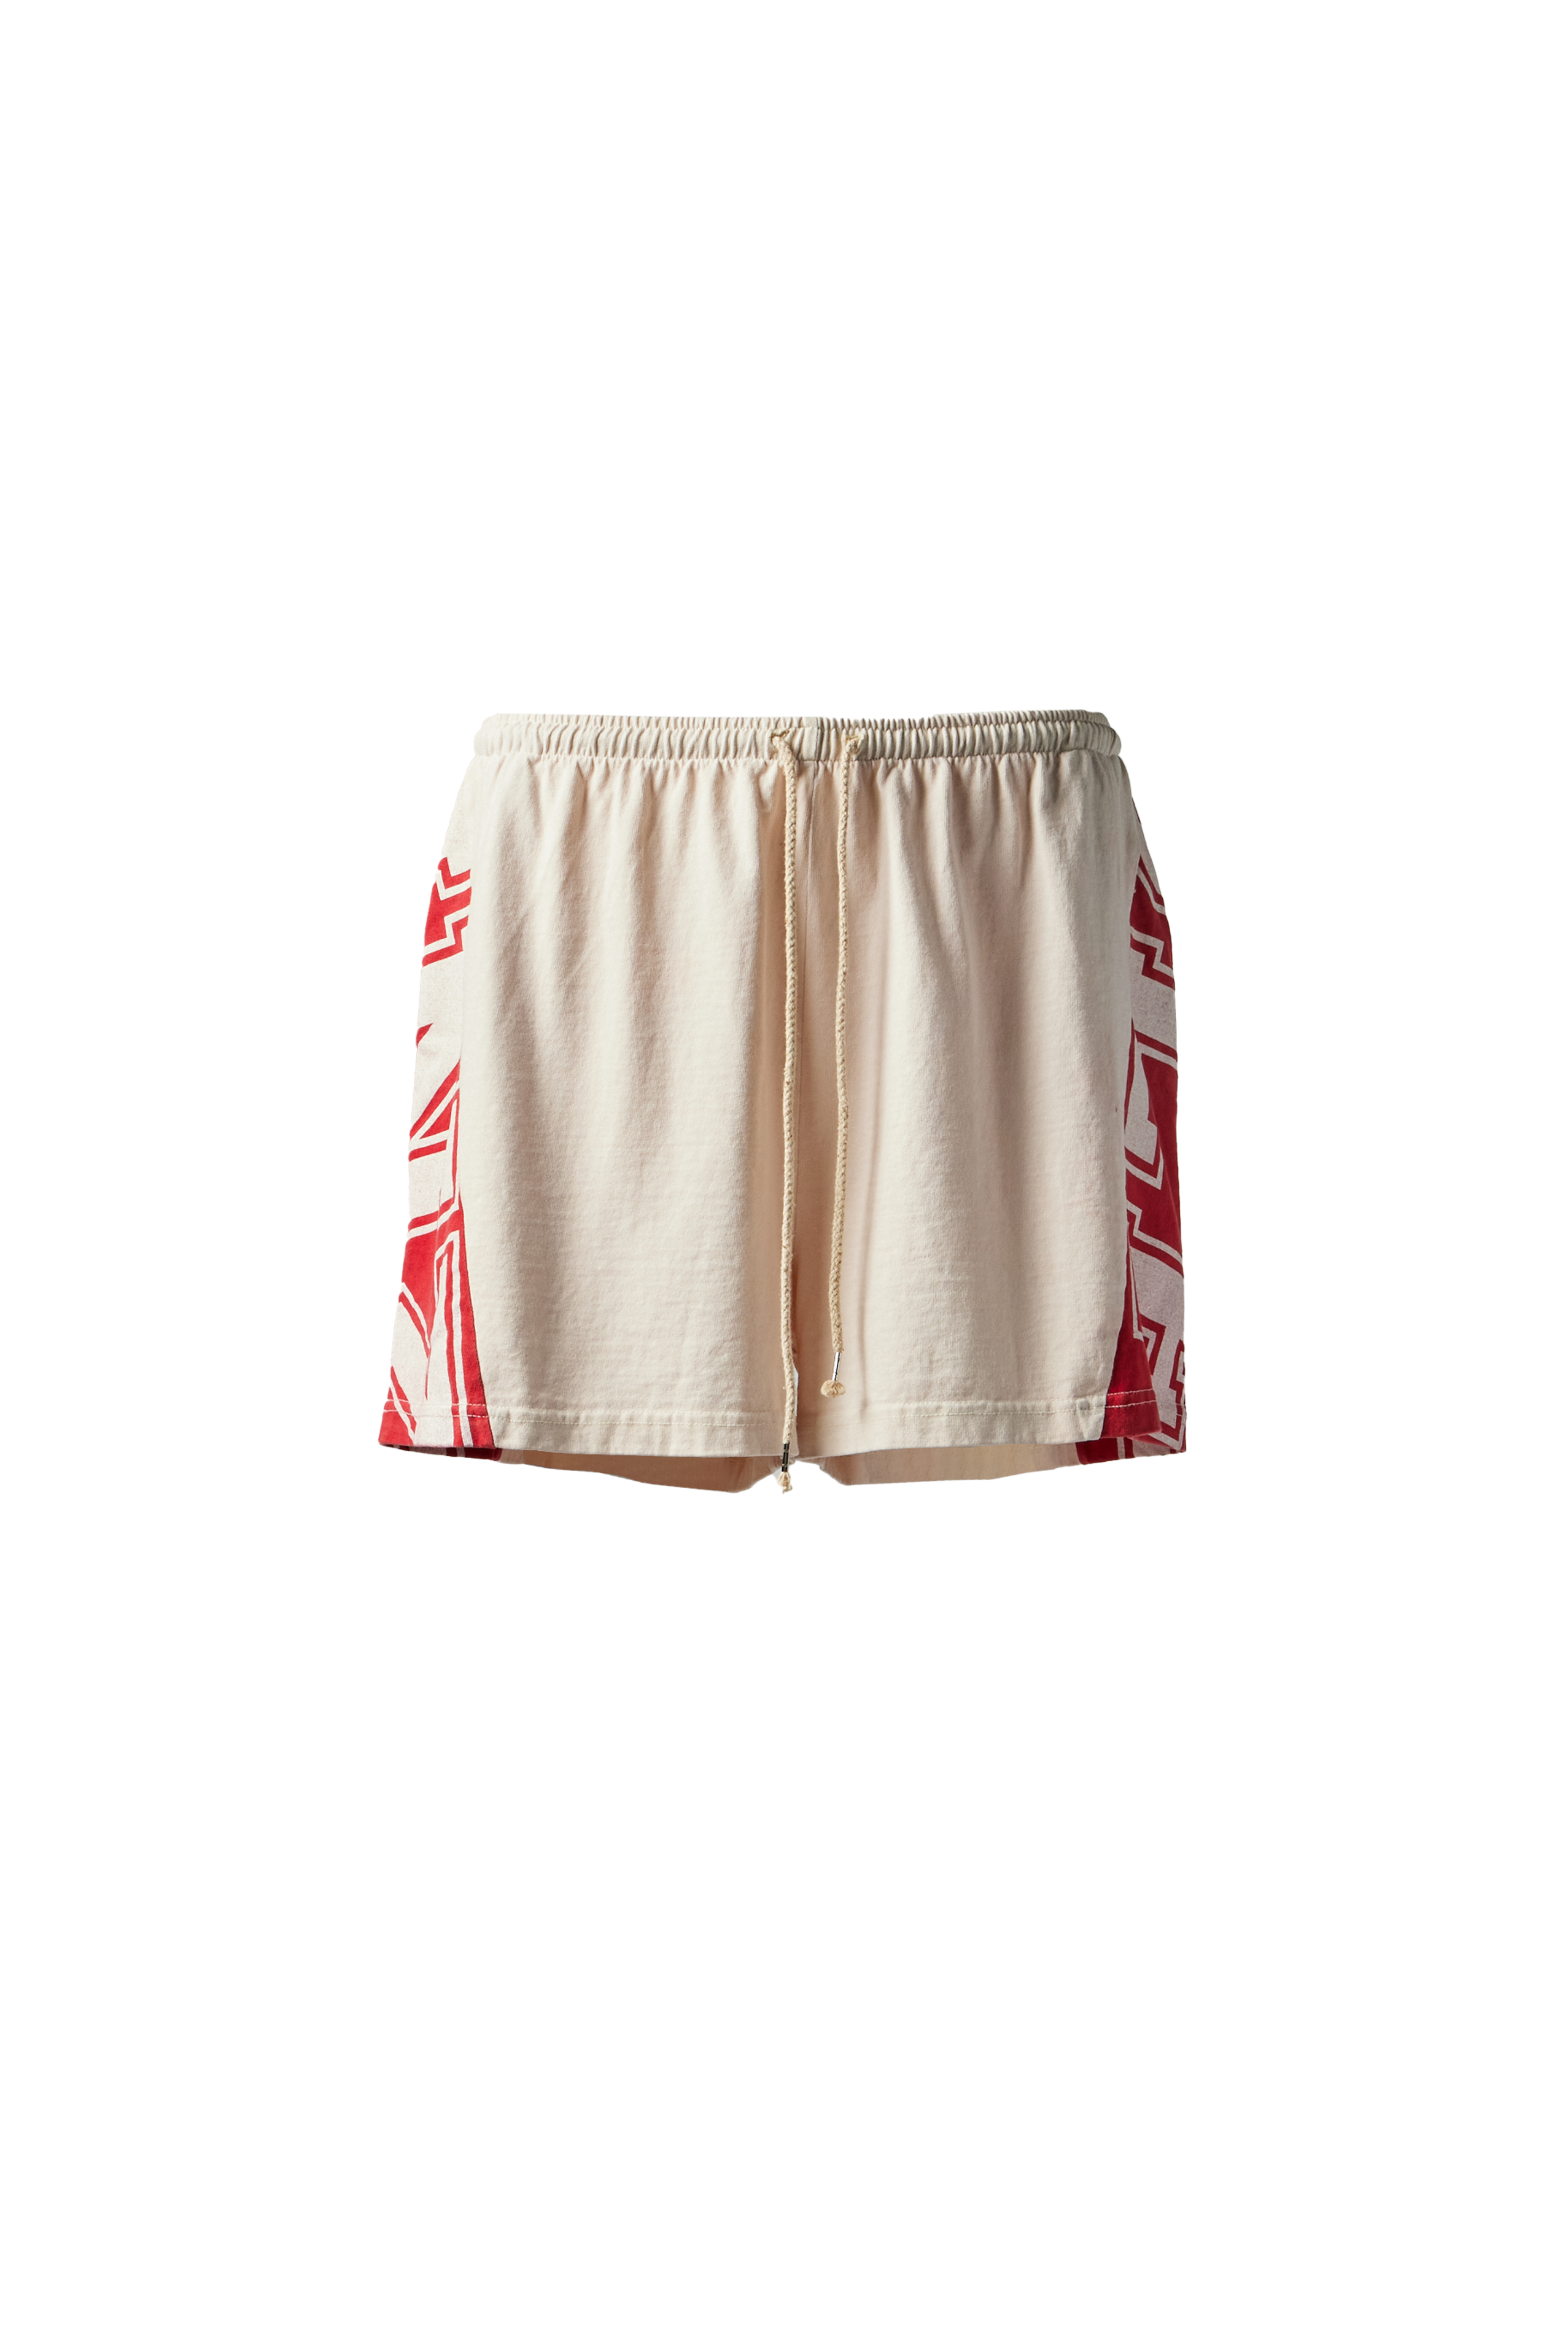 SECND SLF - Reconstructed Collegiate Shorts product image